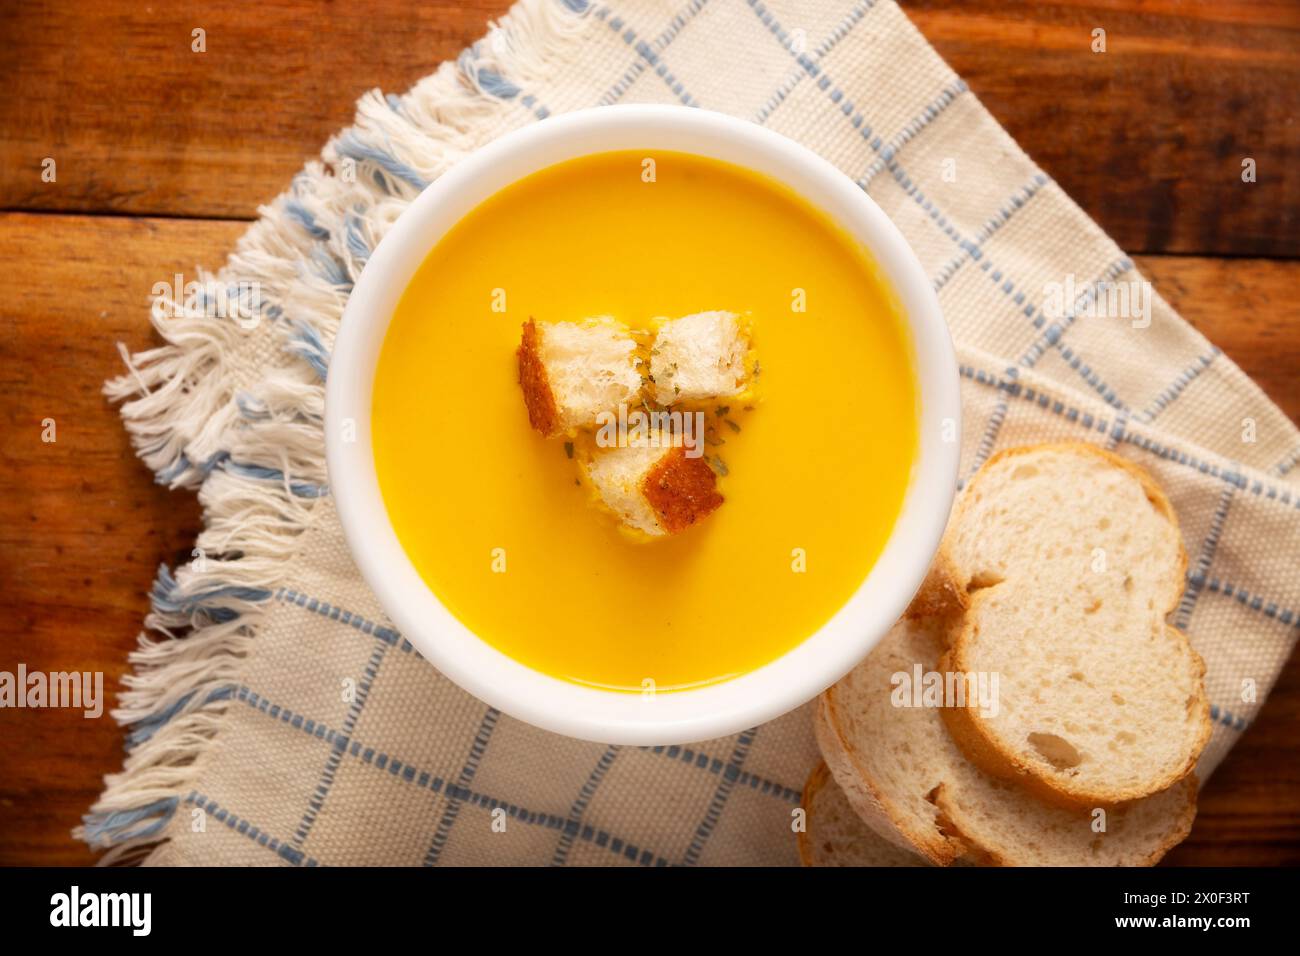 Homemade carrot and pumpkin cream soup. Easy, nutritious and healthy recipe. Served in a white bowl with bread croutons. Perfect to accompany everyday Stock Photo